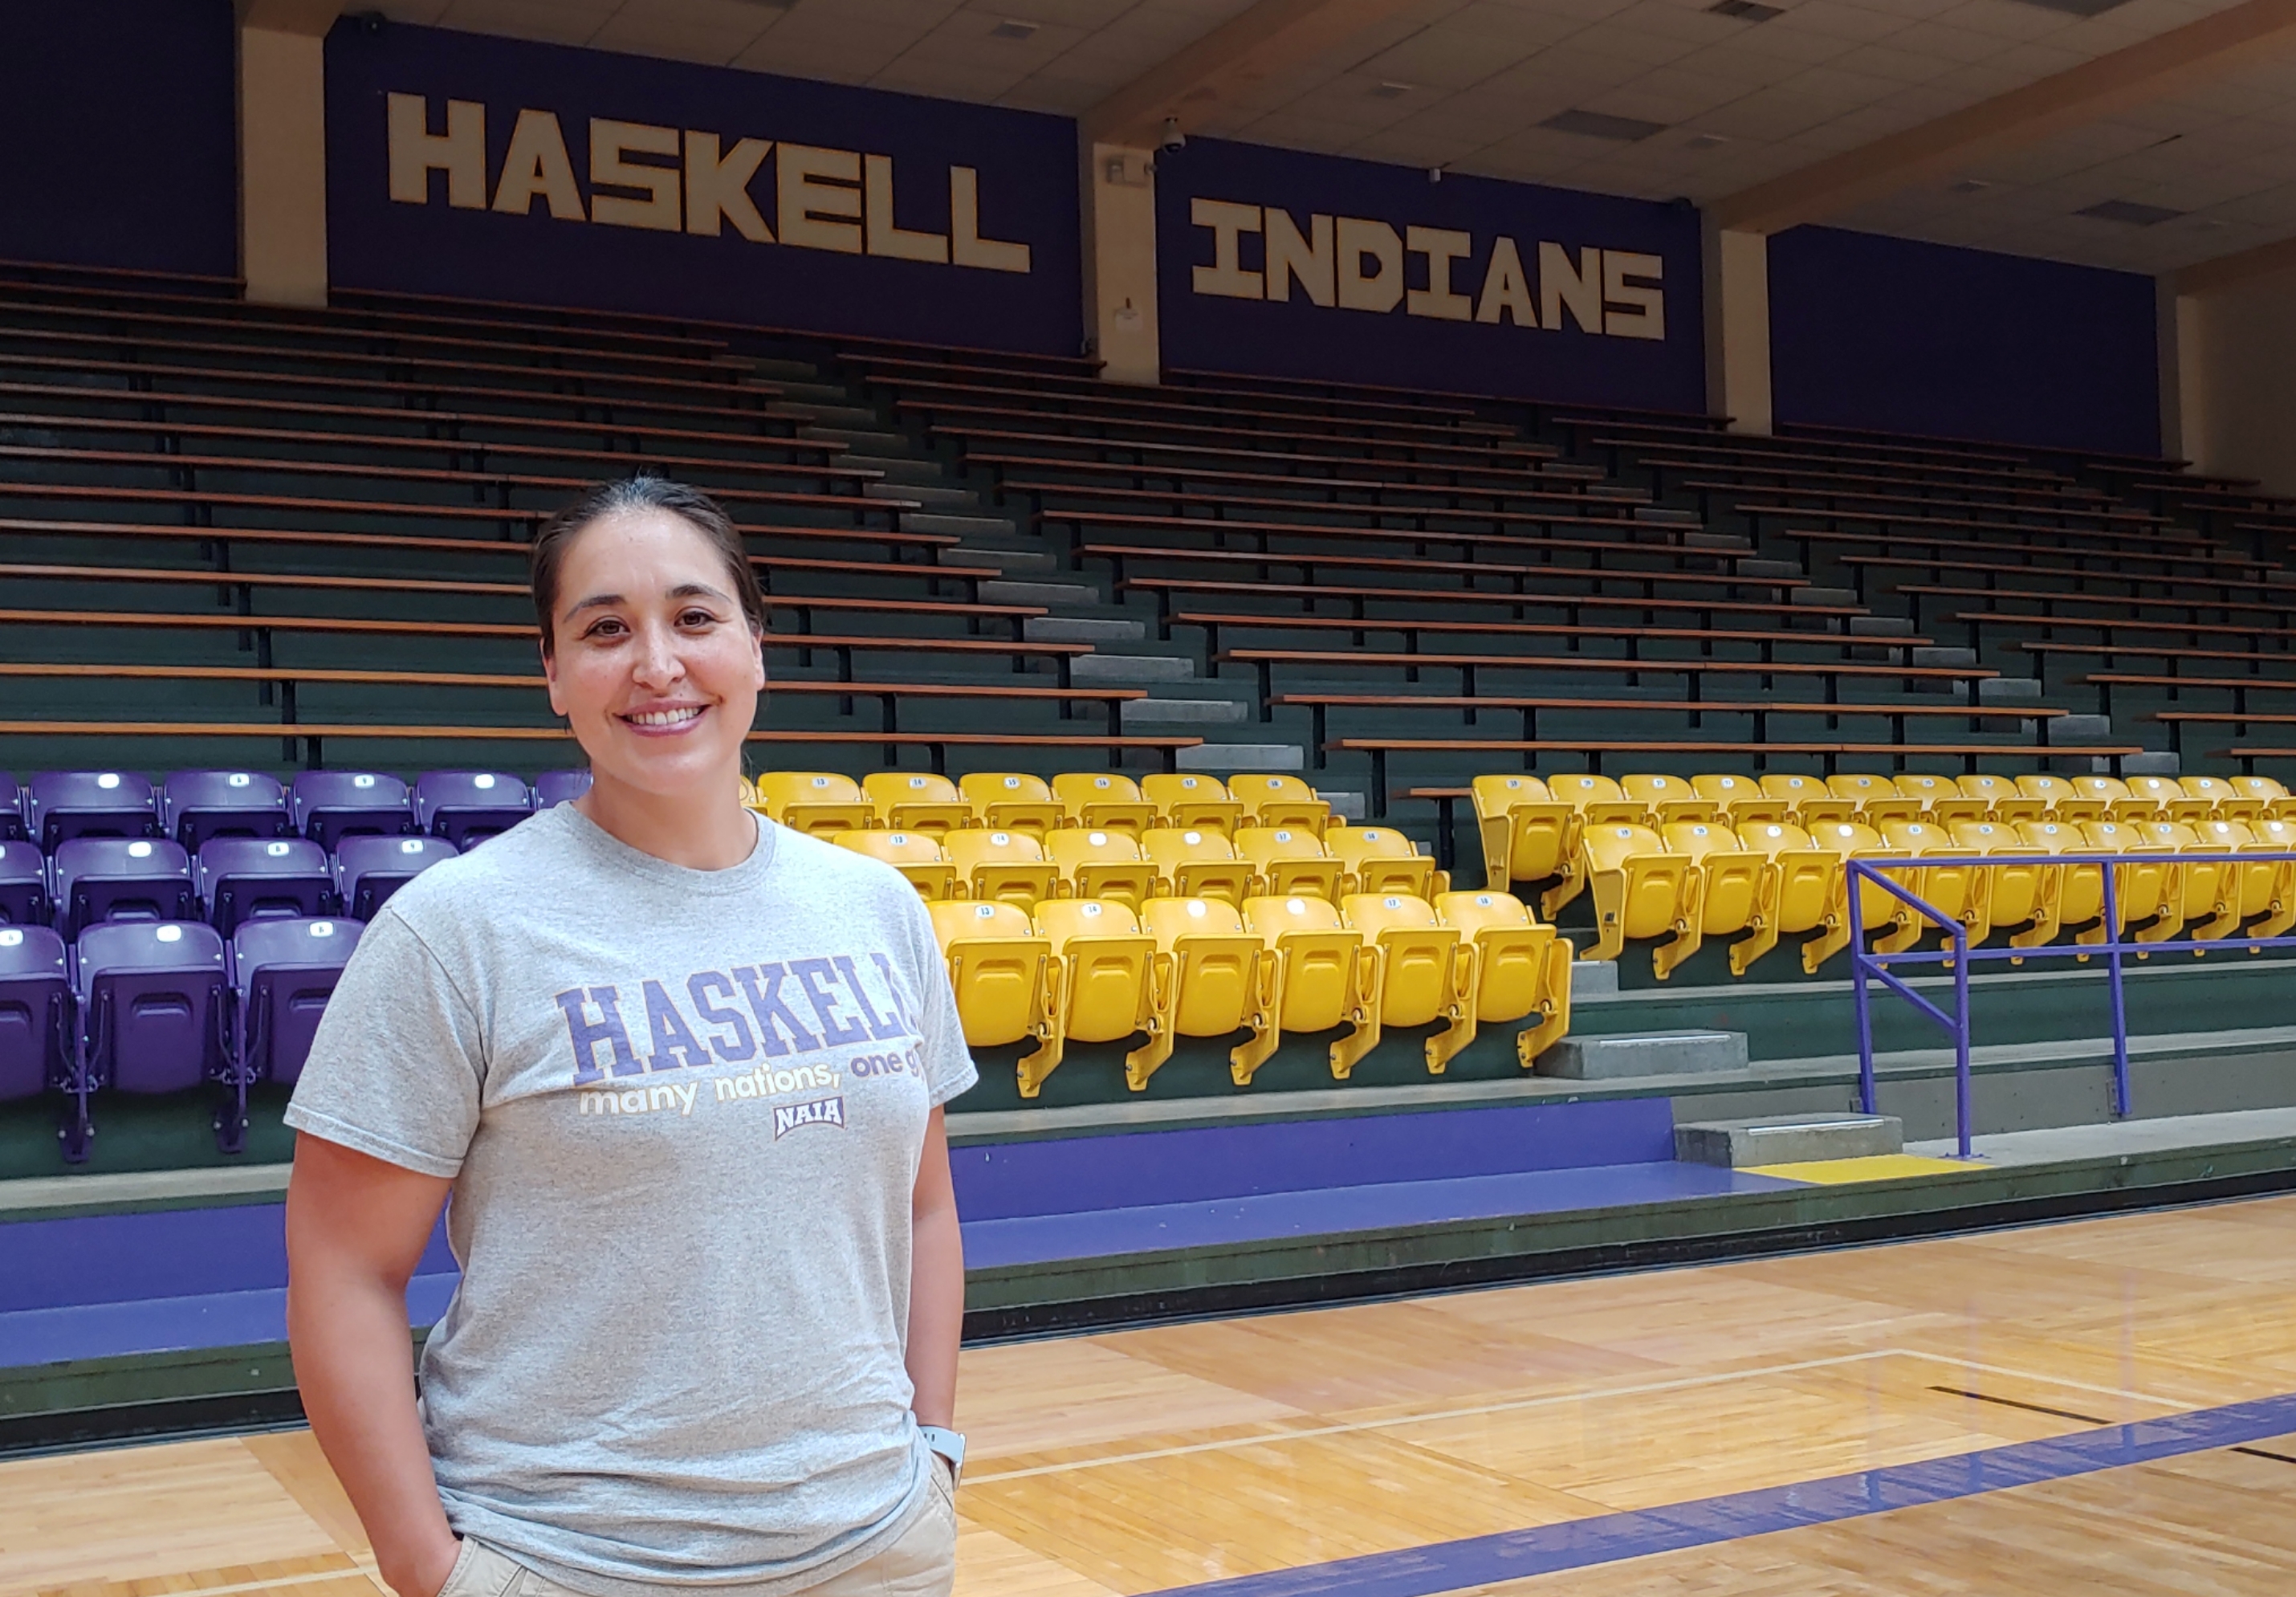 Haskell Indian Nations University hire Alta Malchoff-St. Pierre as its New Head Volleyball Coach